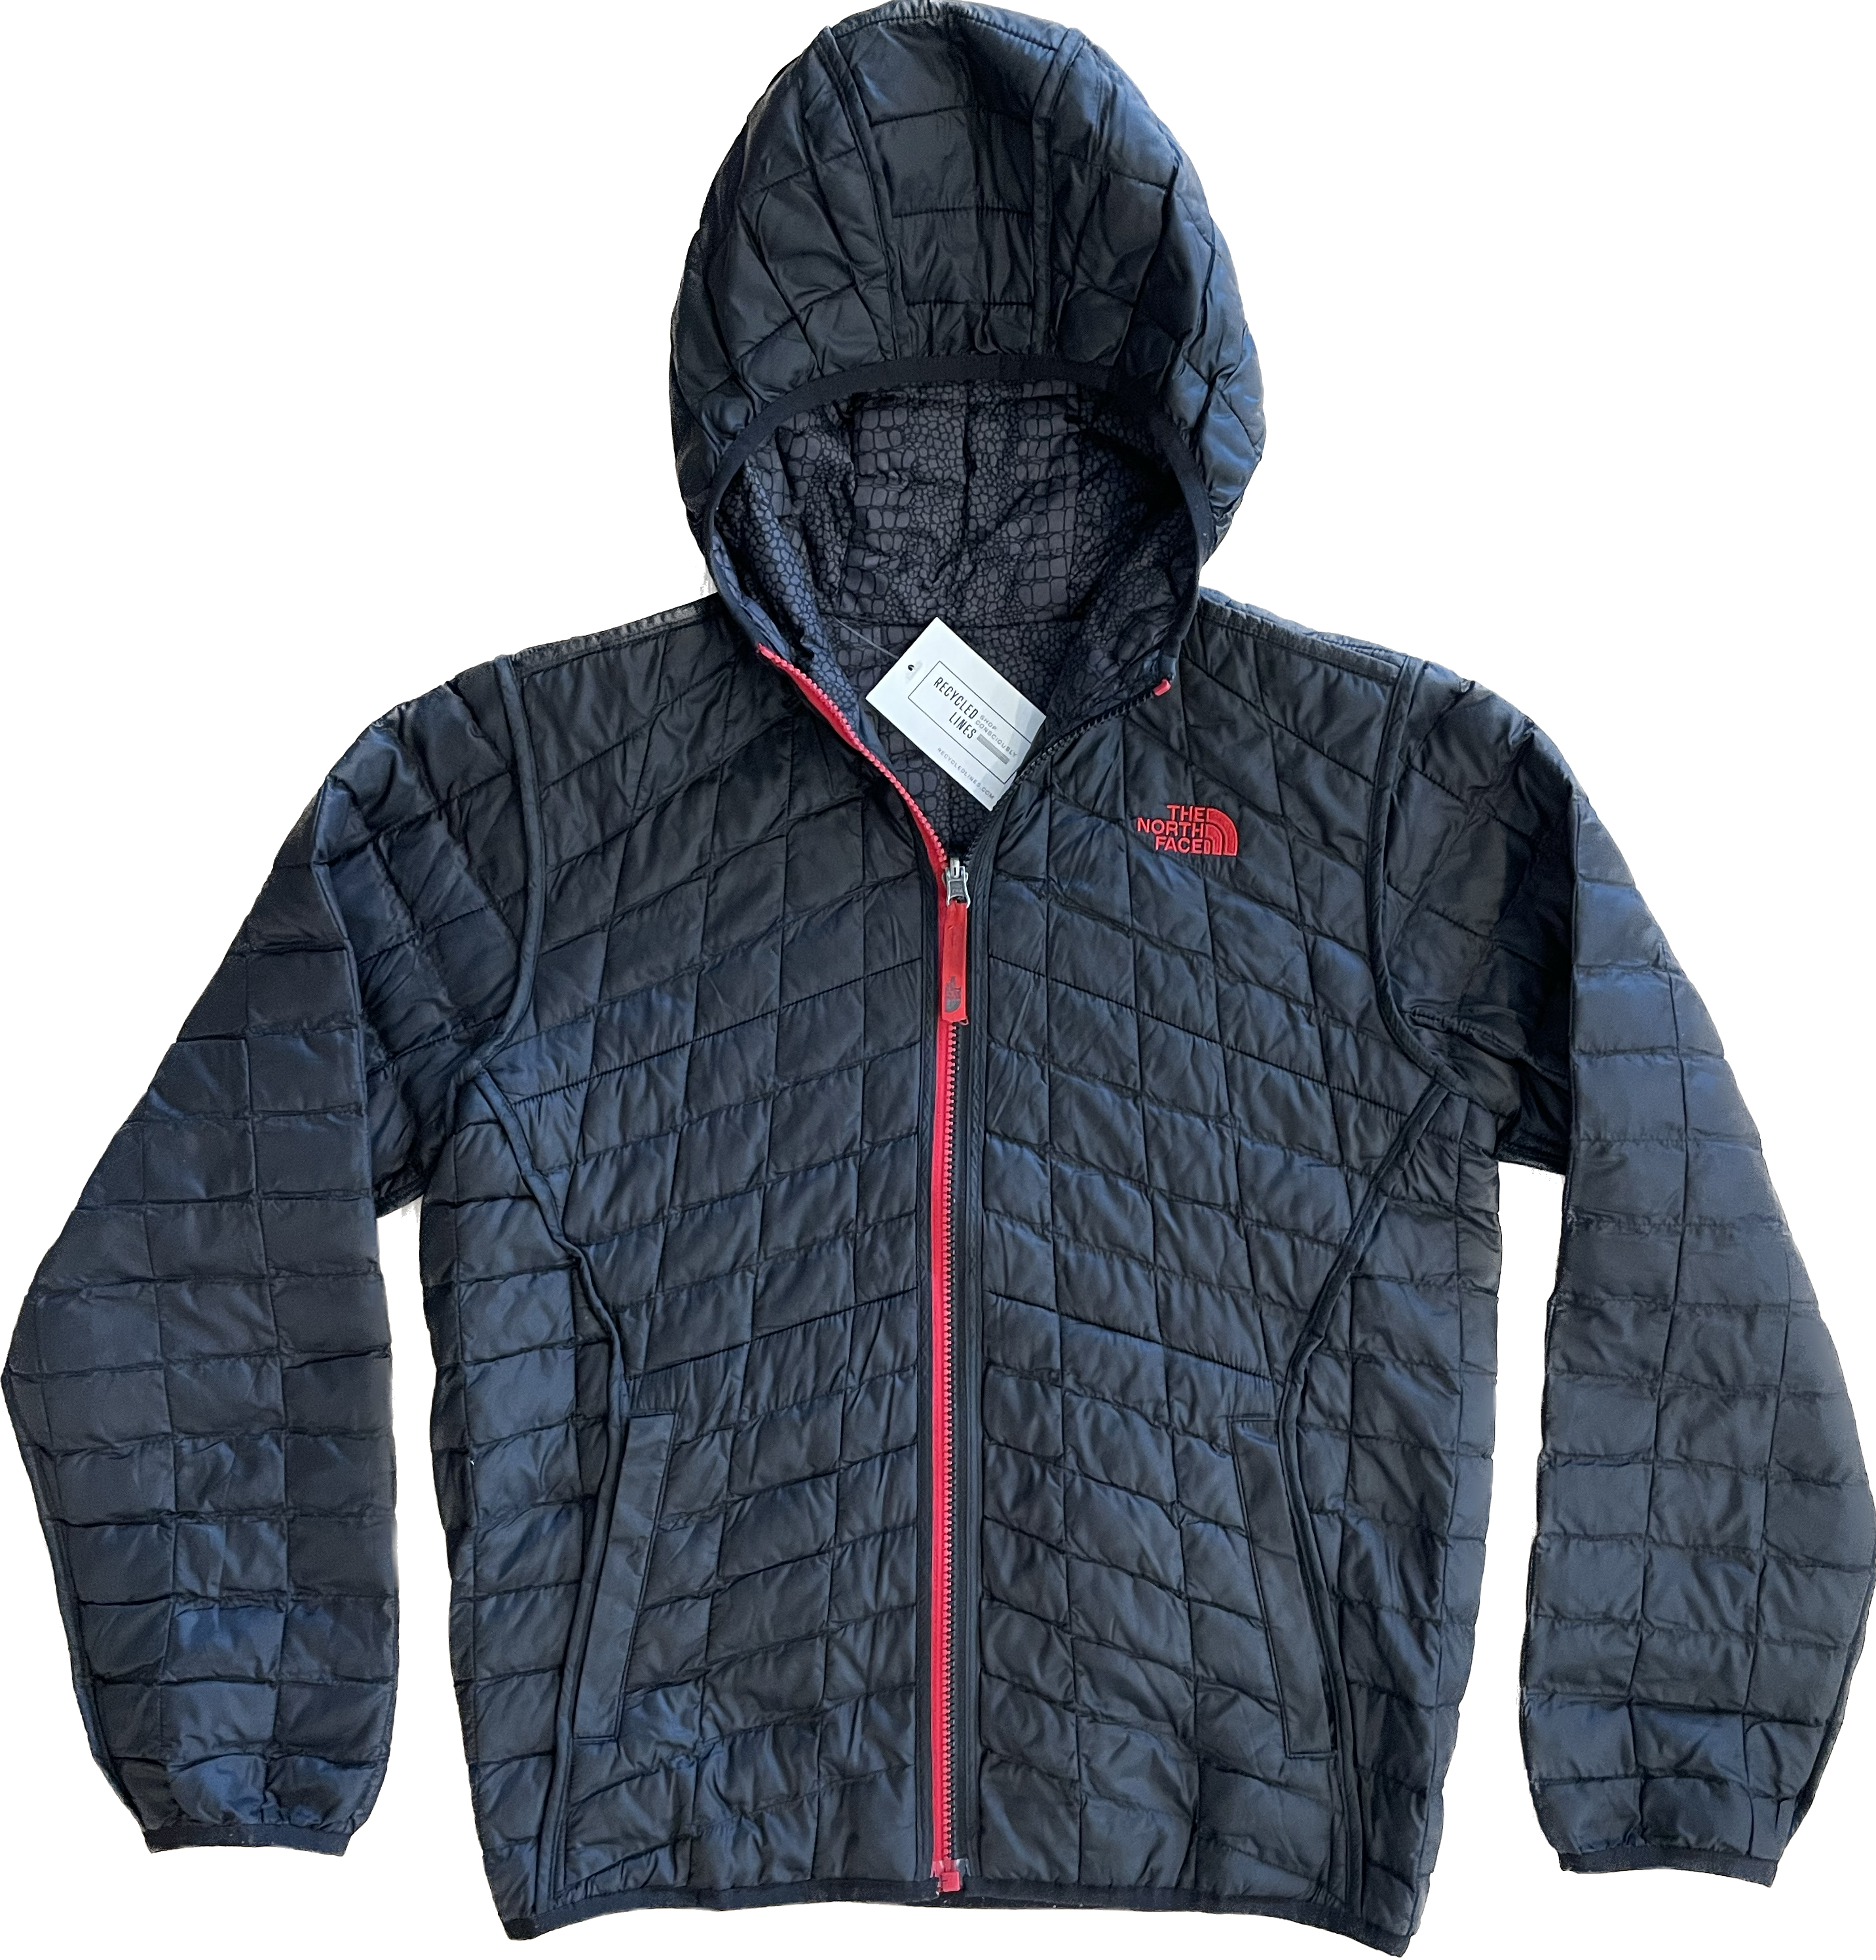 Boys North Face Jacket | North face jacket, North face thermoball jacket,  Clothes design